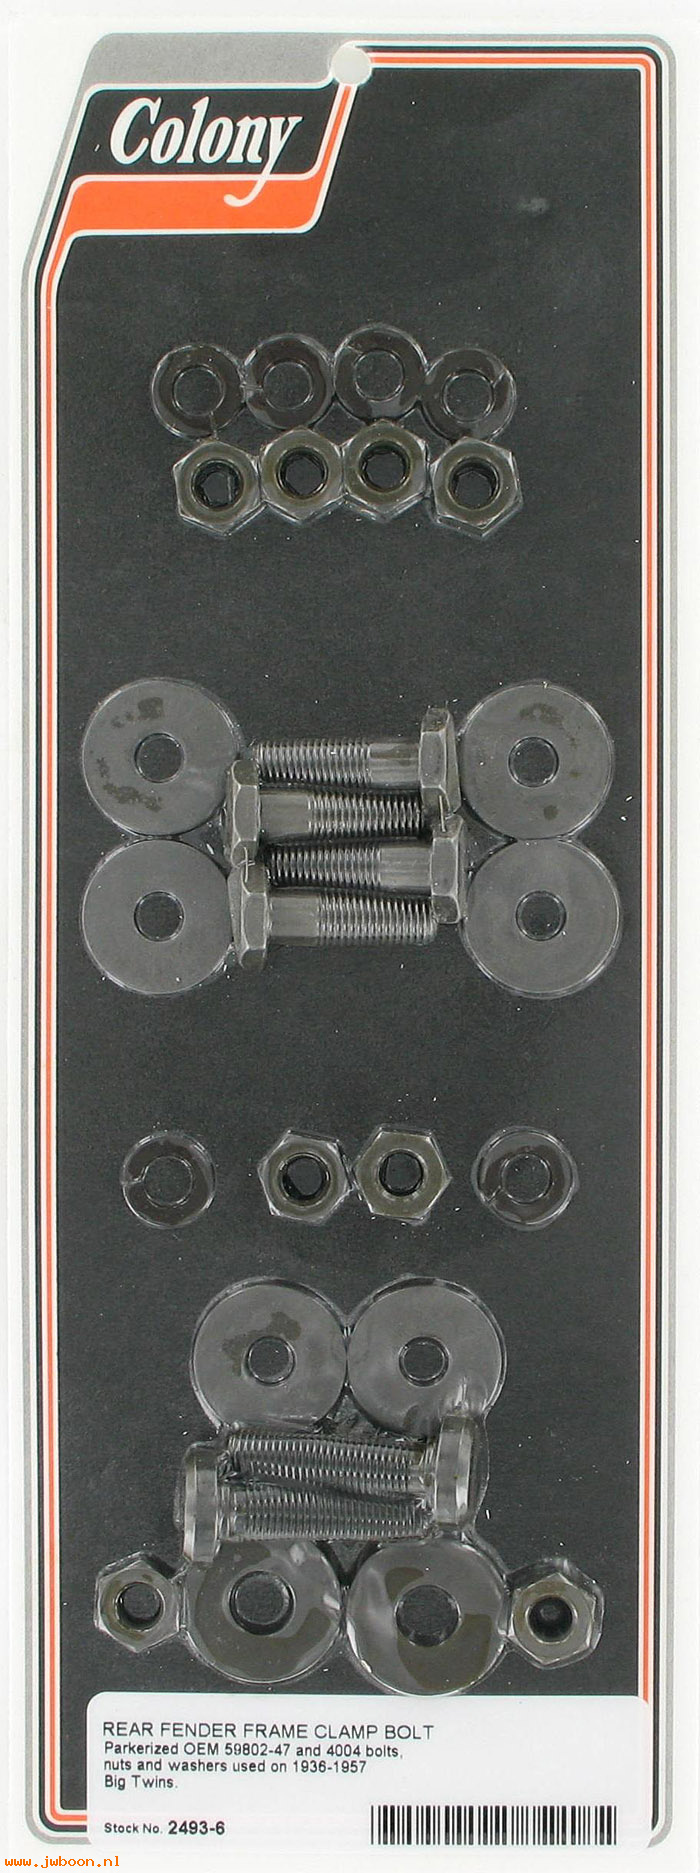 C 2493-6 (59802-47 / 3743-47): Bolt kit, rear fender to frame clamp - Big Twins 38-57, in stock